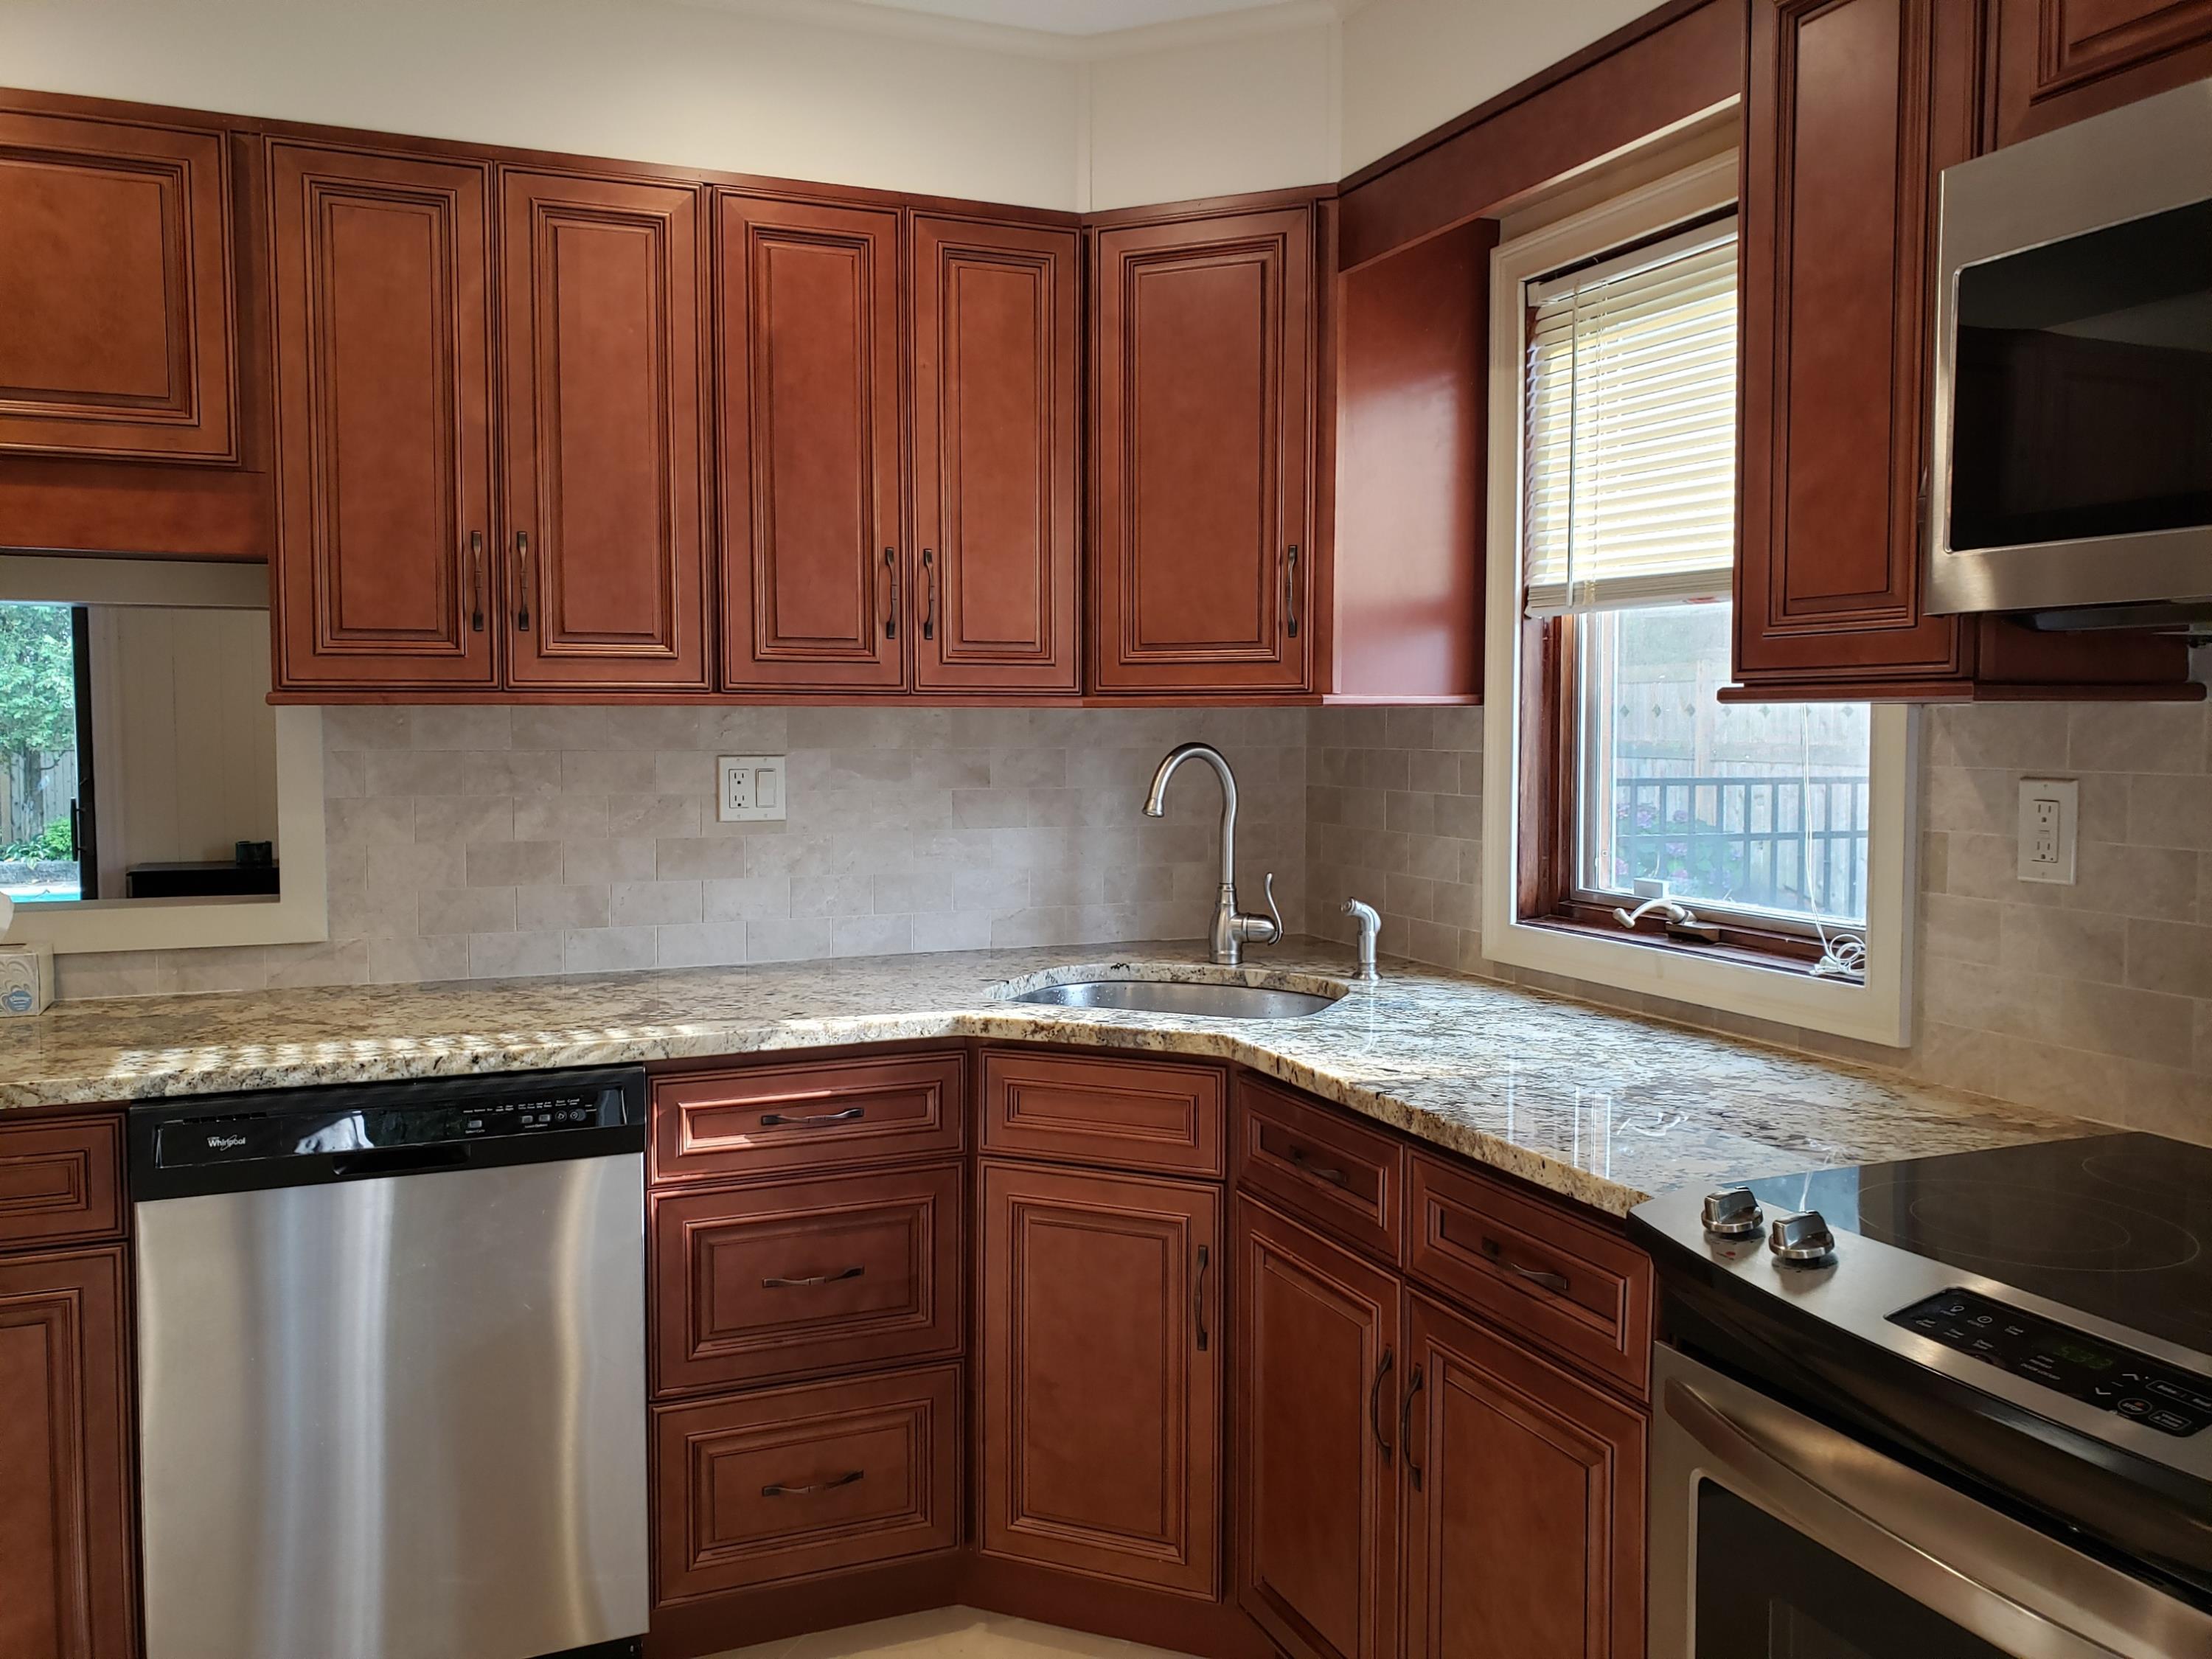 Kitchen renovation with brown cabinets